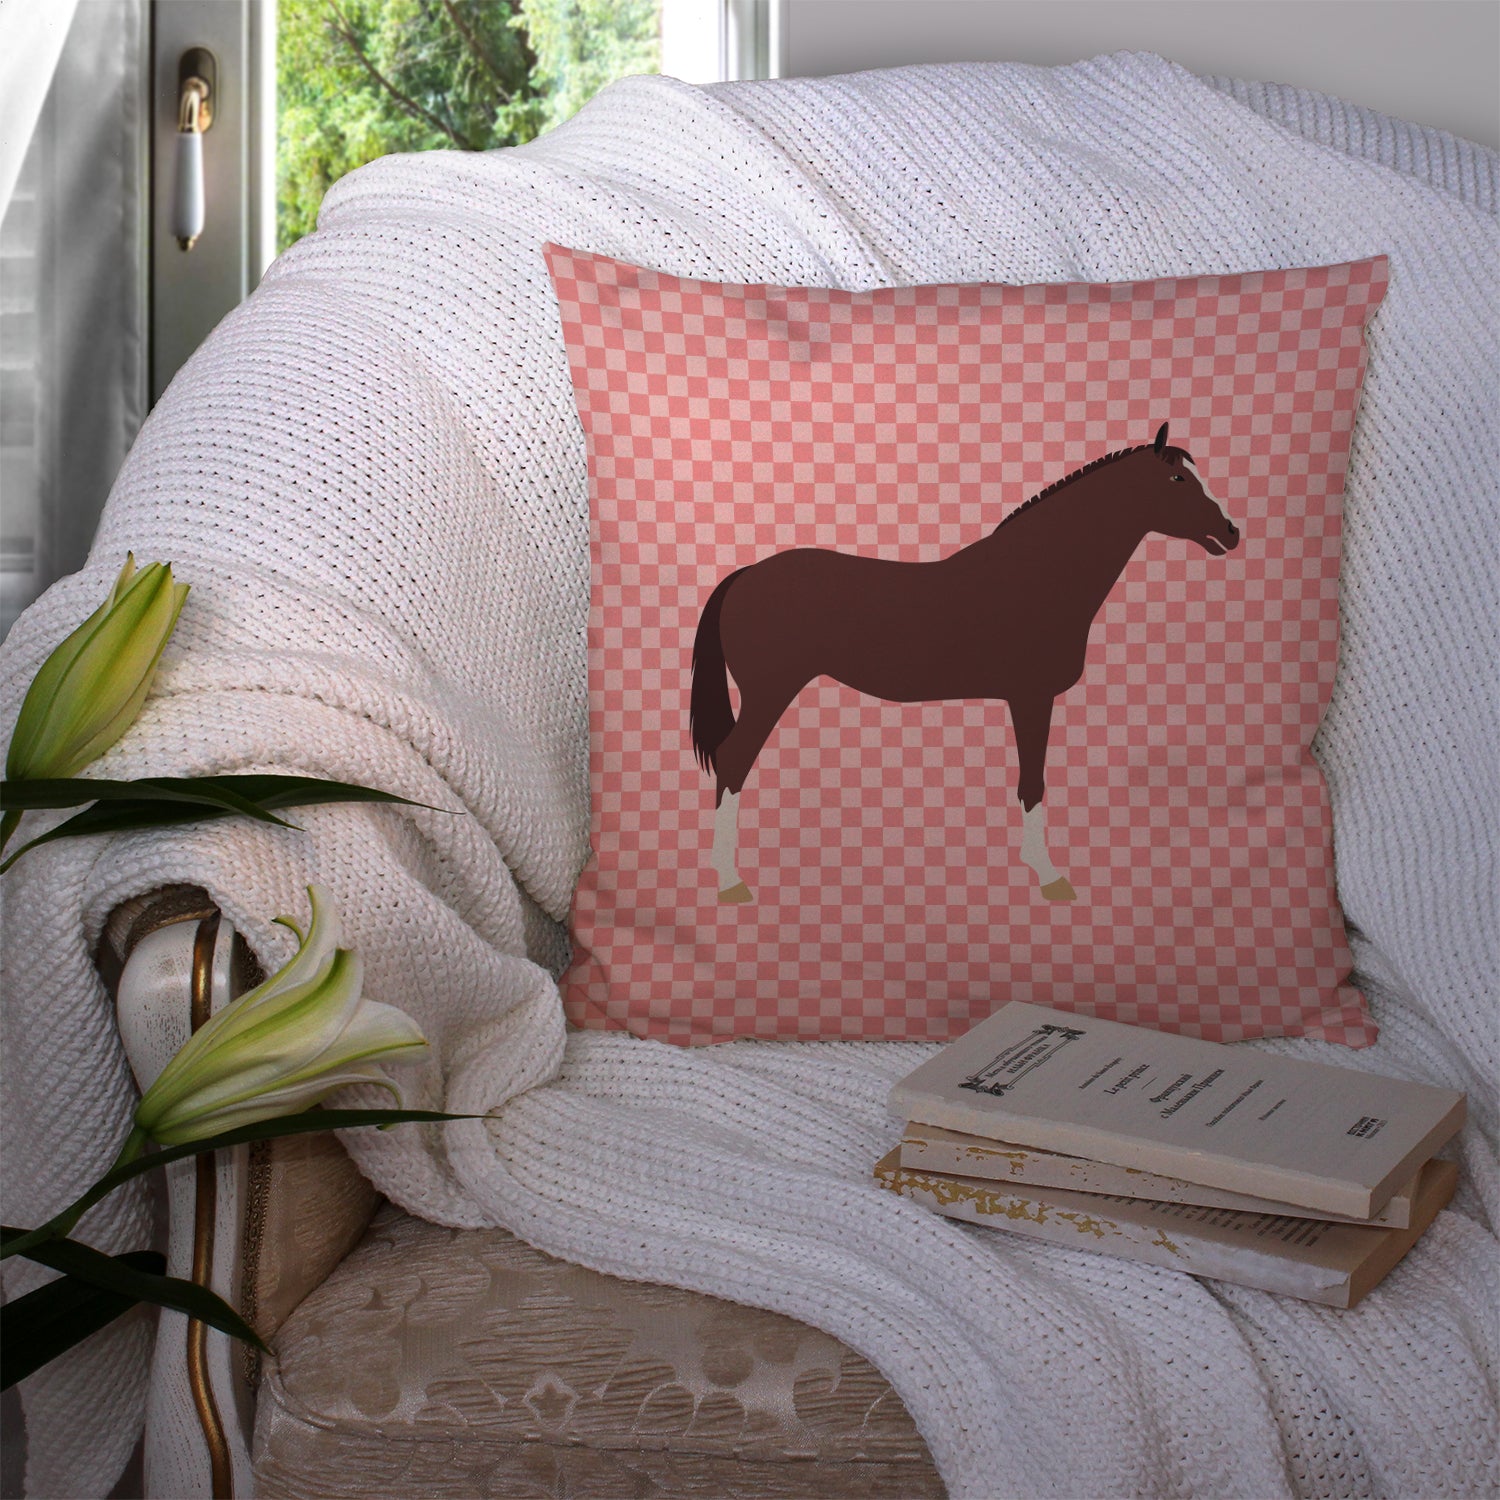 English Thoroughbred Horse Pink Check Fabric Decorative Pillow BB7913PW1414 - the-store.com